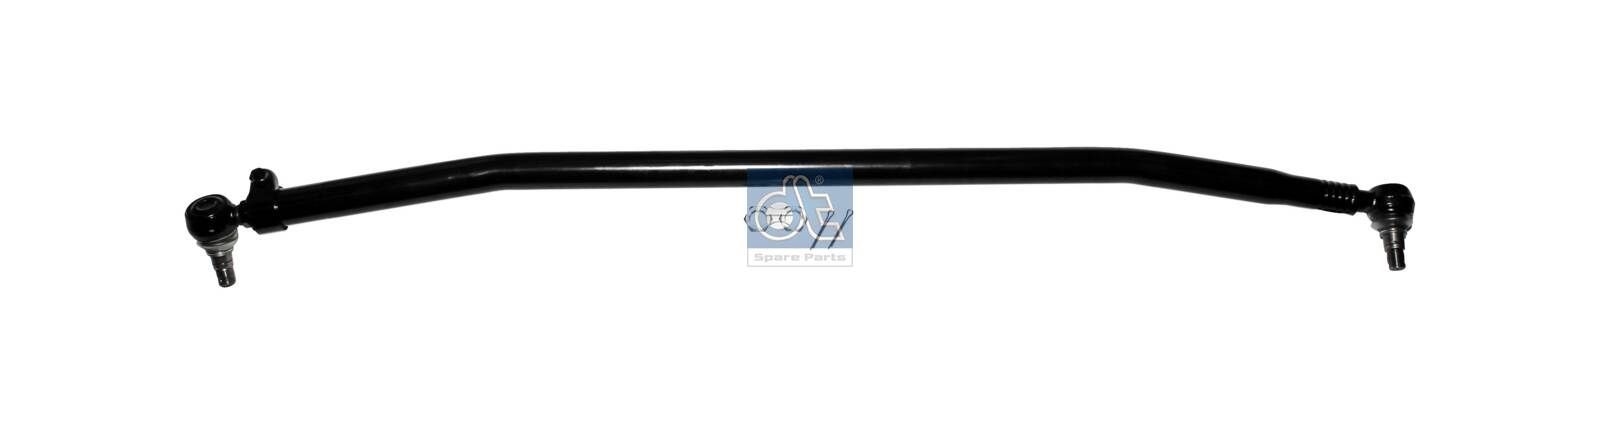 DT Spare Parts 7.30023 Rod Assembly 98489741